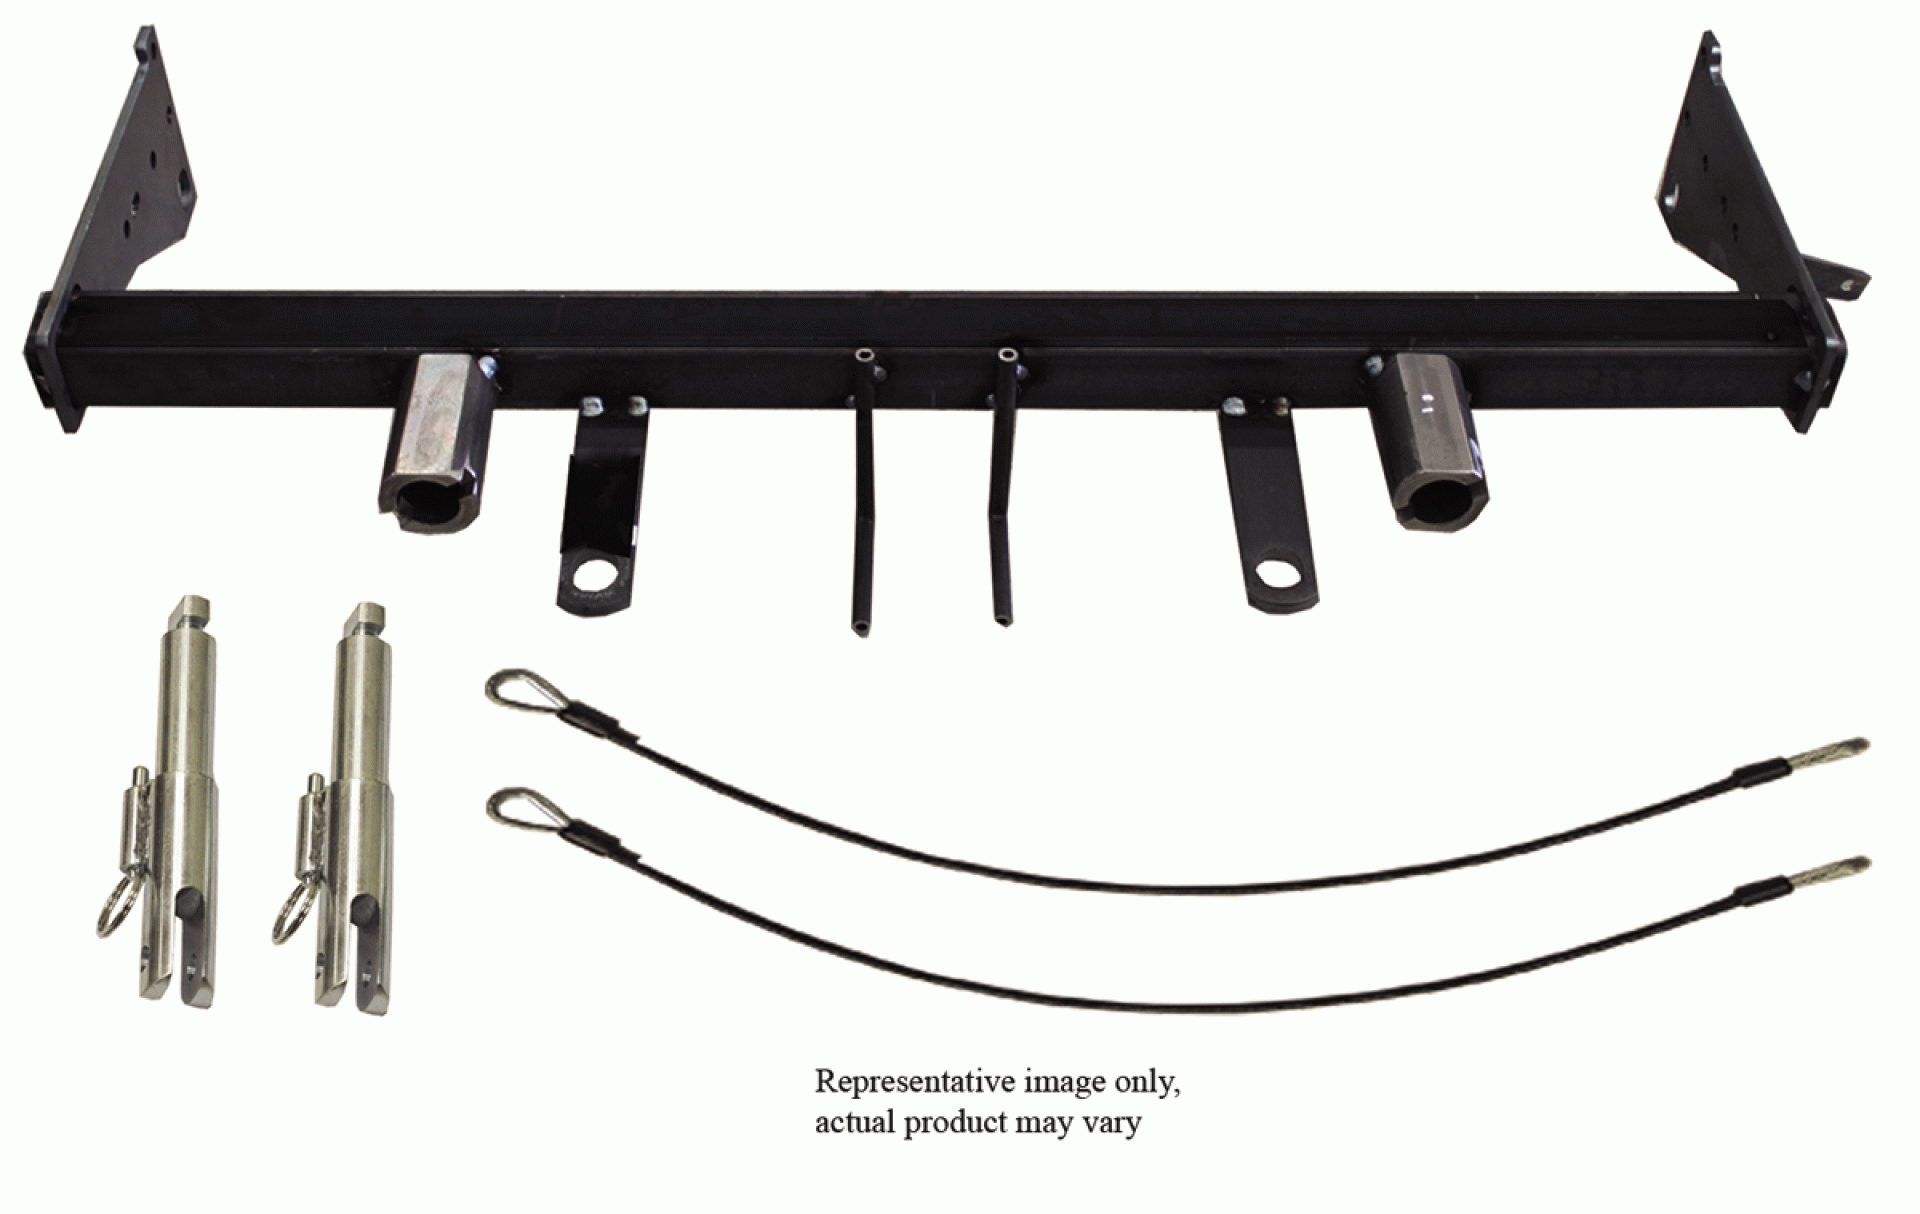 BLUE OX | BX2635 | Custom fit bracket kit attaches to vehicle frame